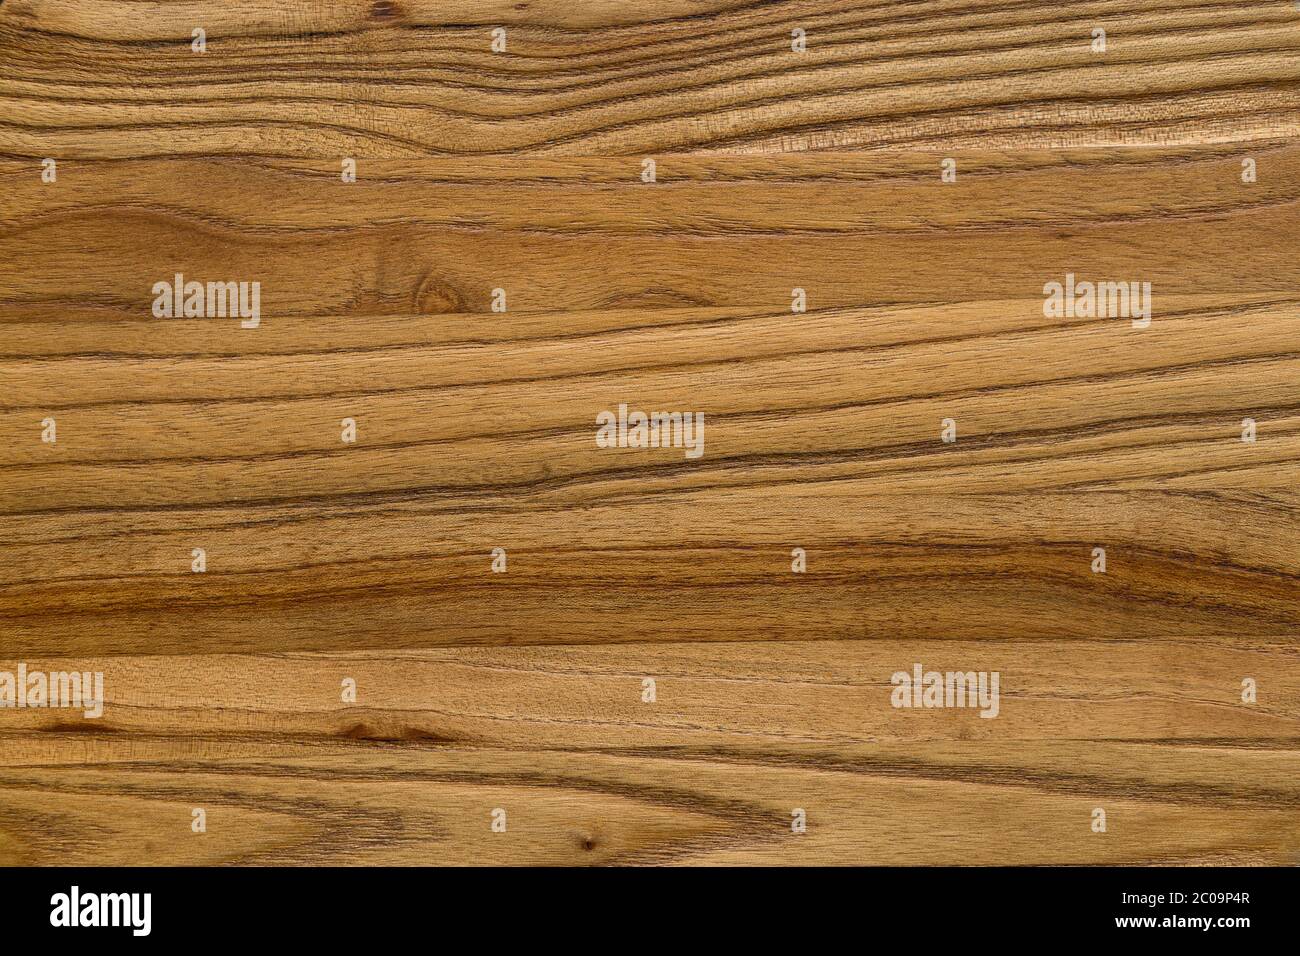 Closeup of wood grain fibers. The wood surface is colored with a natural golden honey brown stain and the wood grain texture runs horizontally. Stock Photo